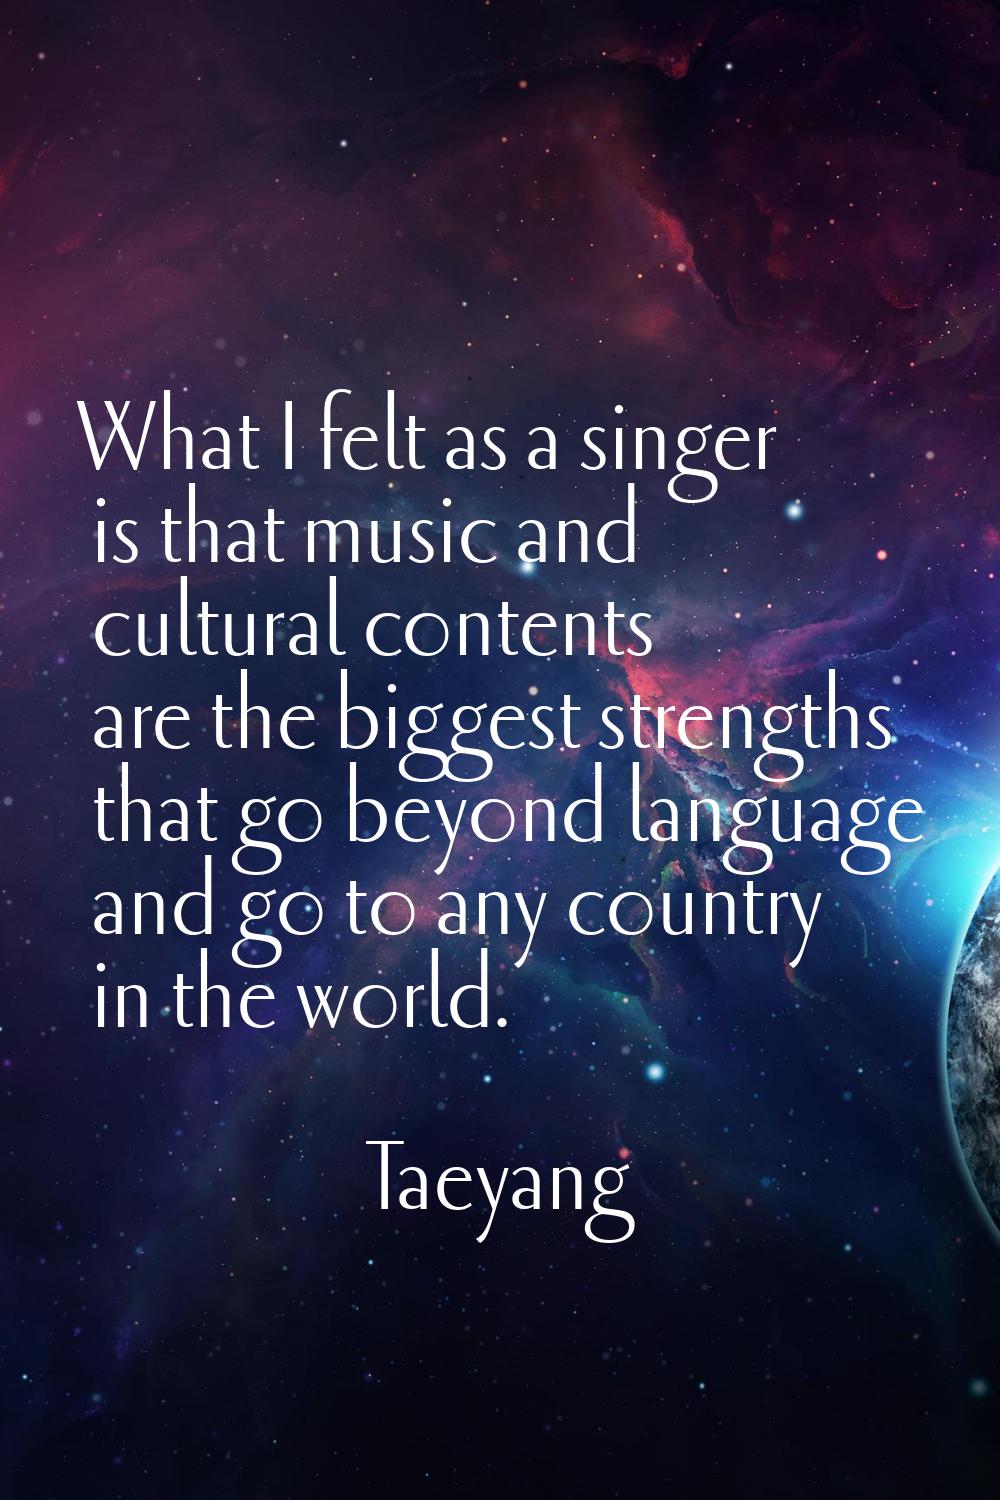 What I felt as a singer is that music and cultural contents are the biggest strengths that go beyon